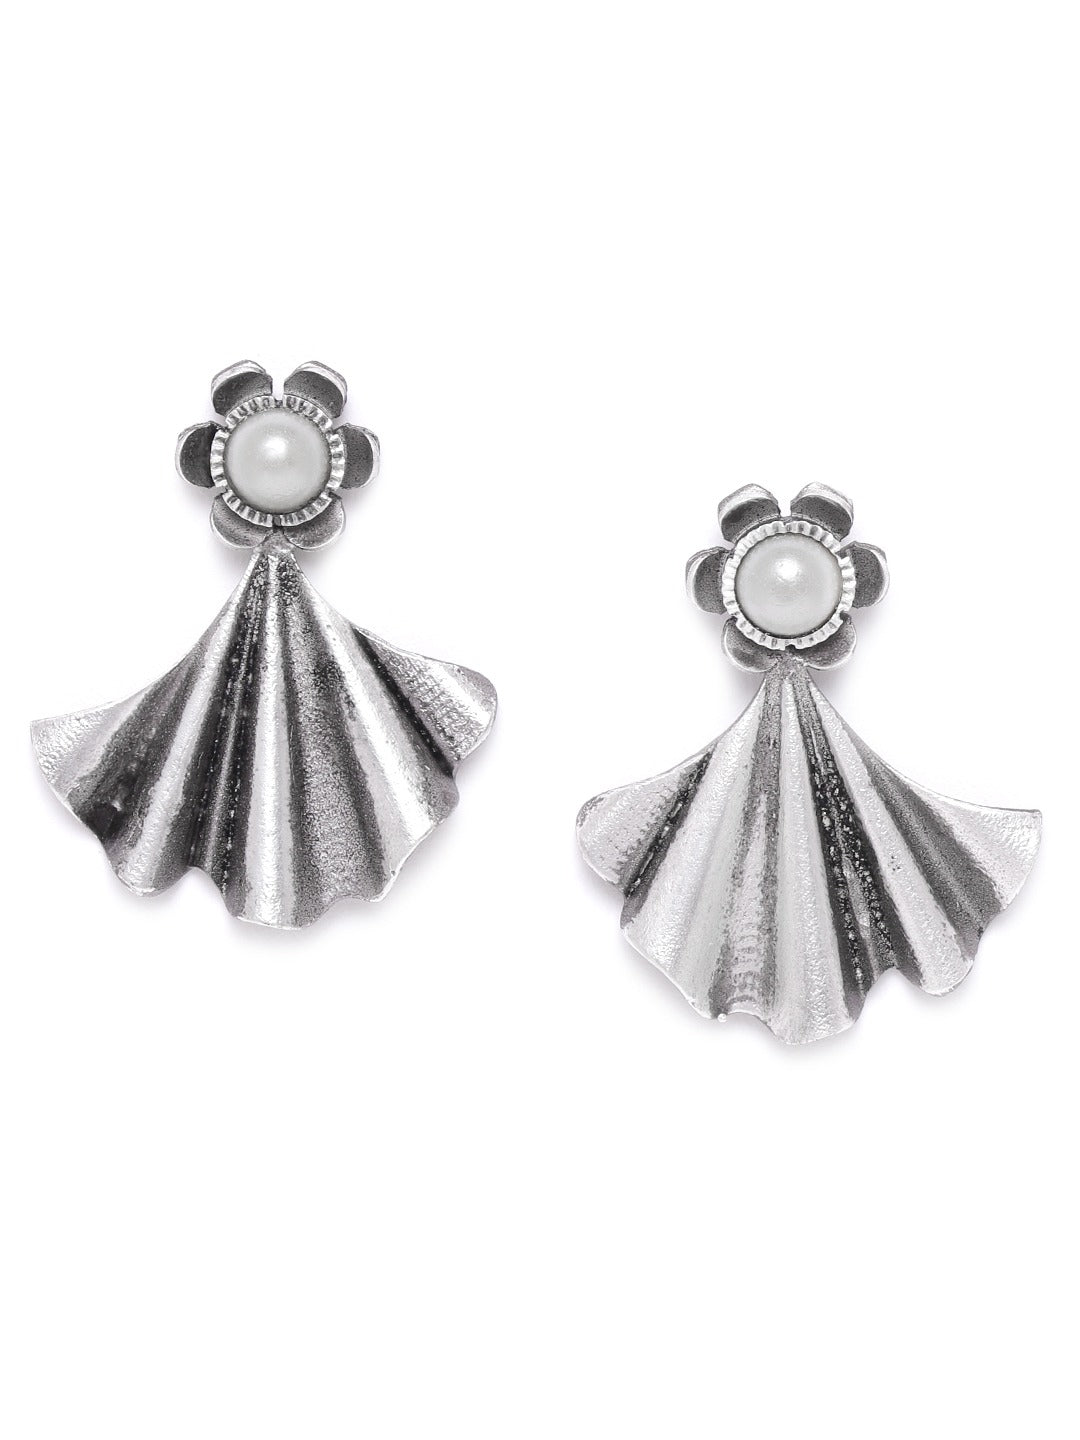 Oxidised Silver-Plated Pearl studded floral inspired Drop earrings